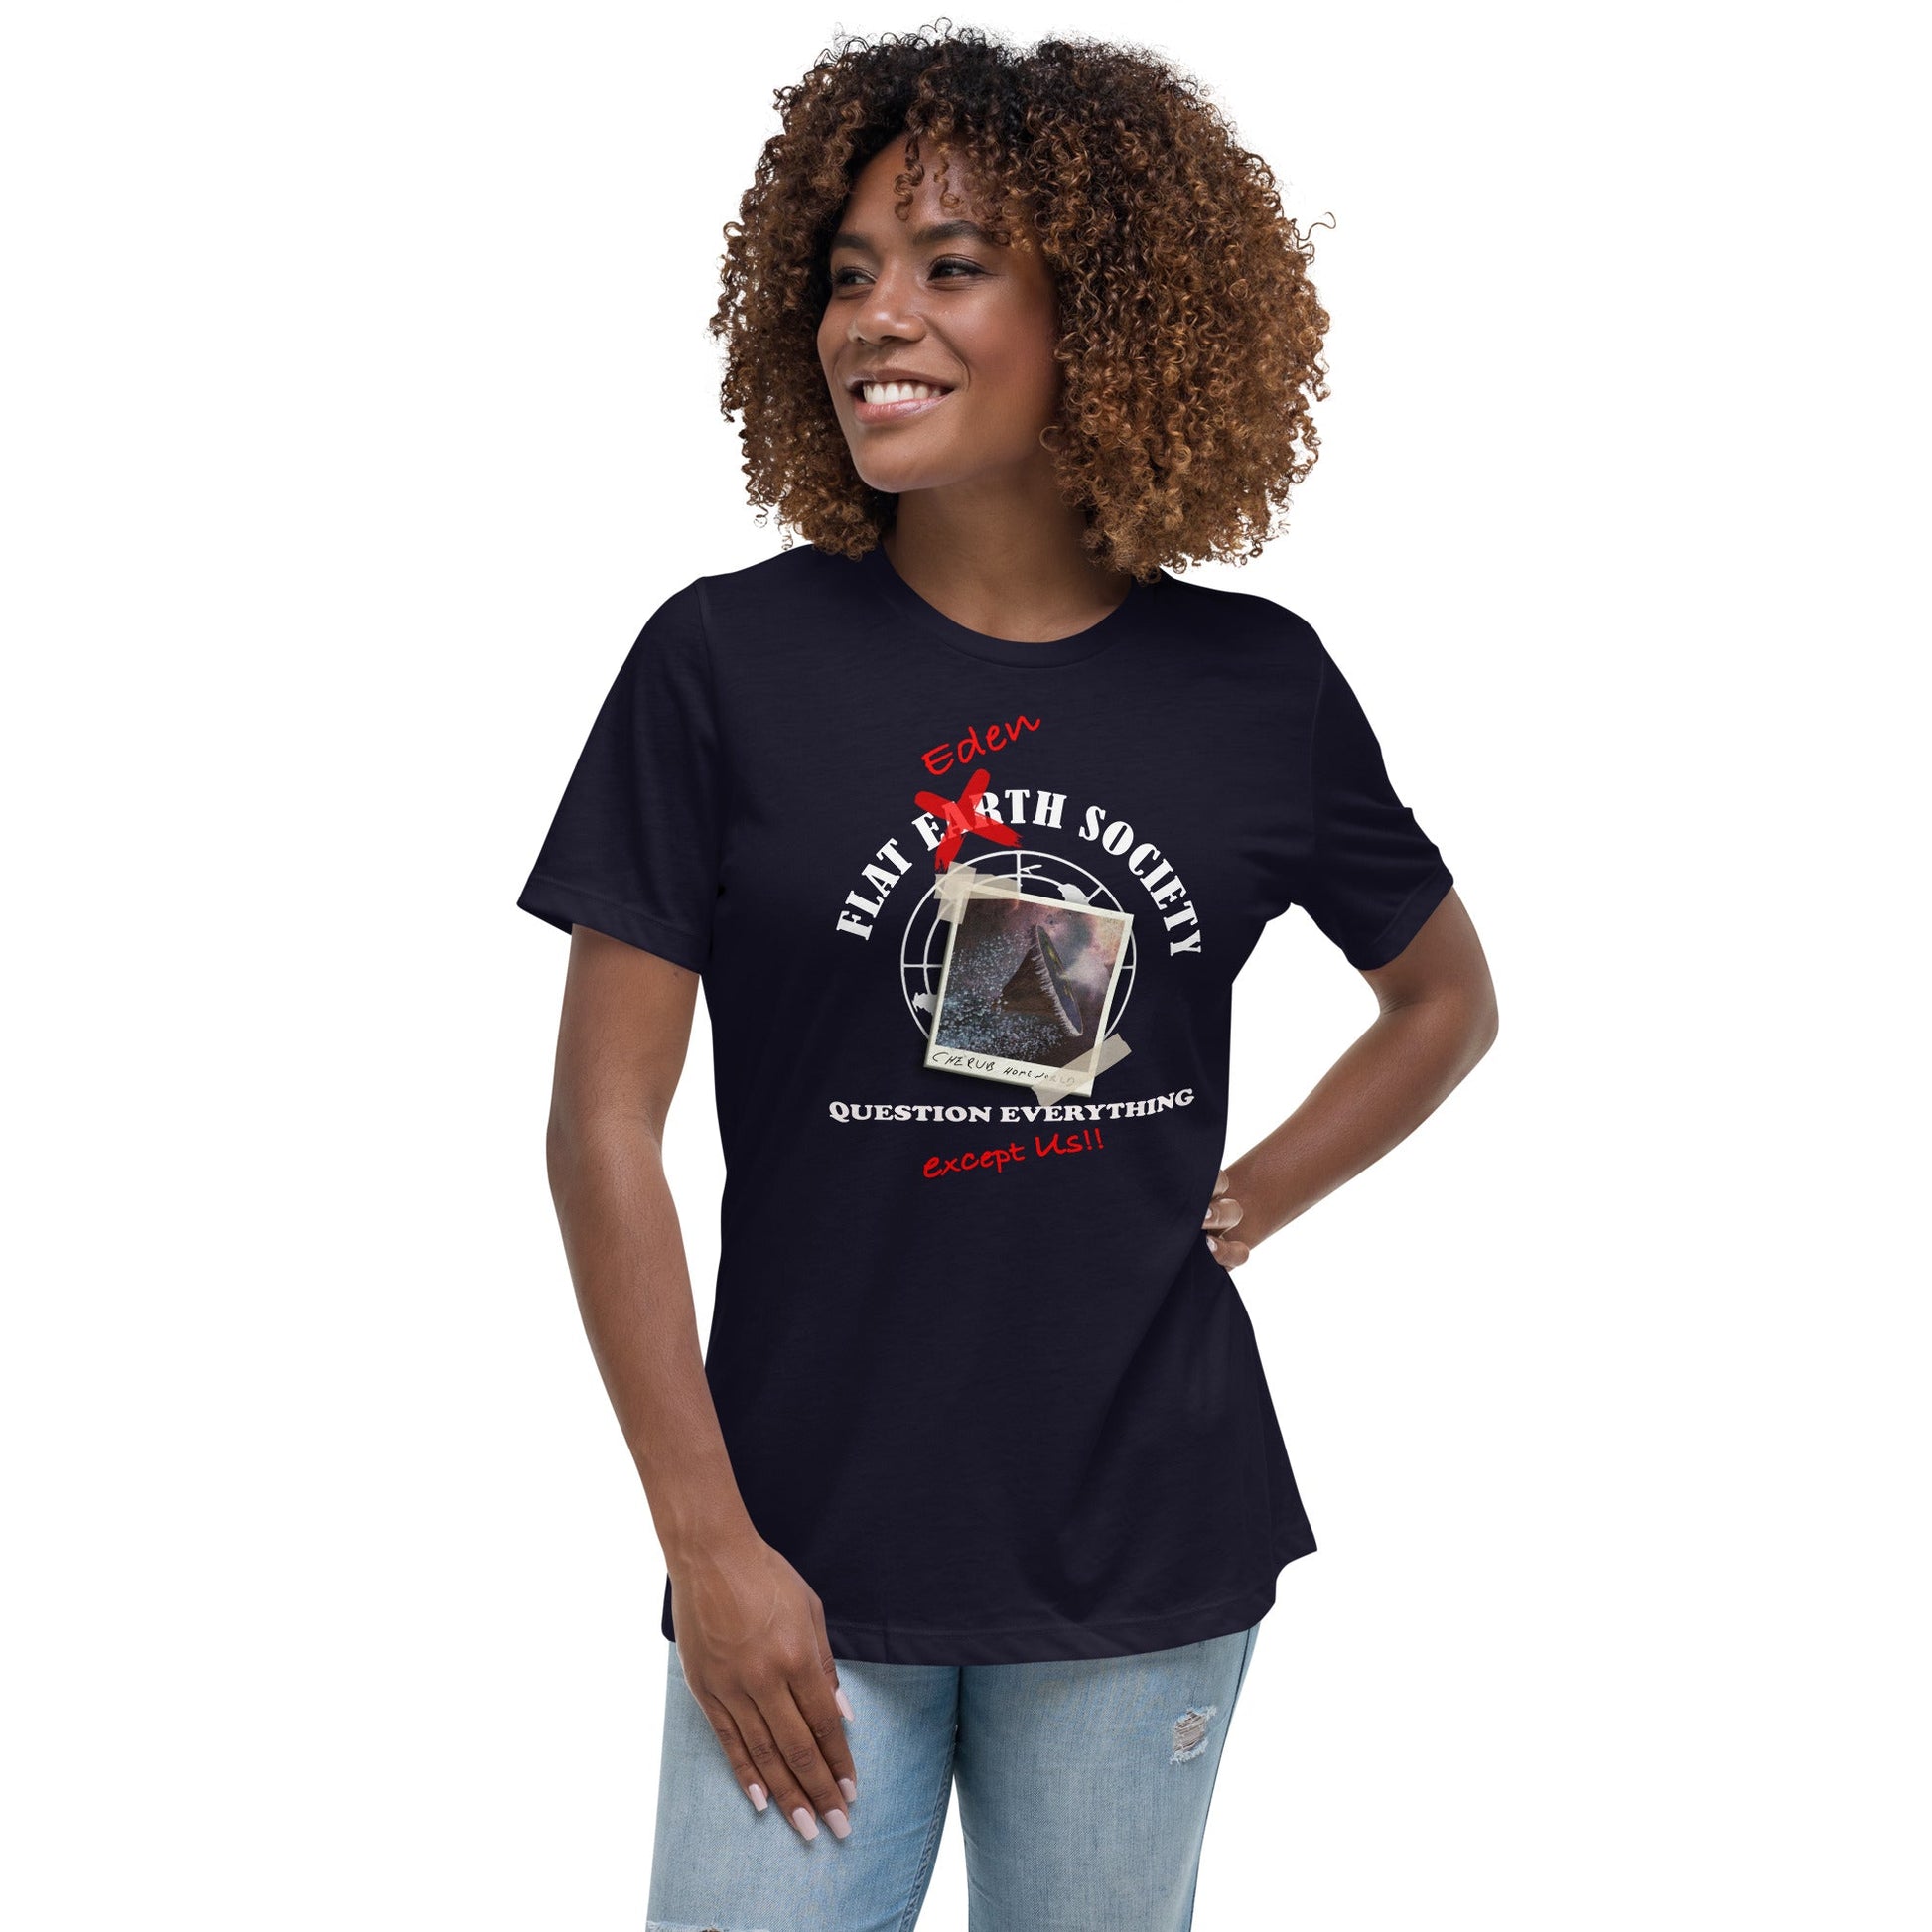 Women's Relaxed T-Shirt | Intergalactic Space Force | Flat Eden Society - Spectral Ink Shop - Shirts & Tops -7596367_10235